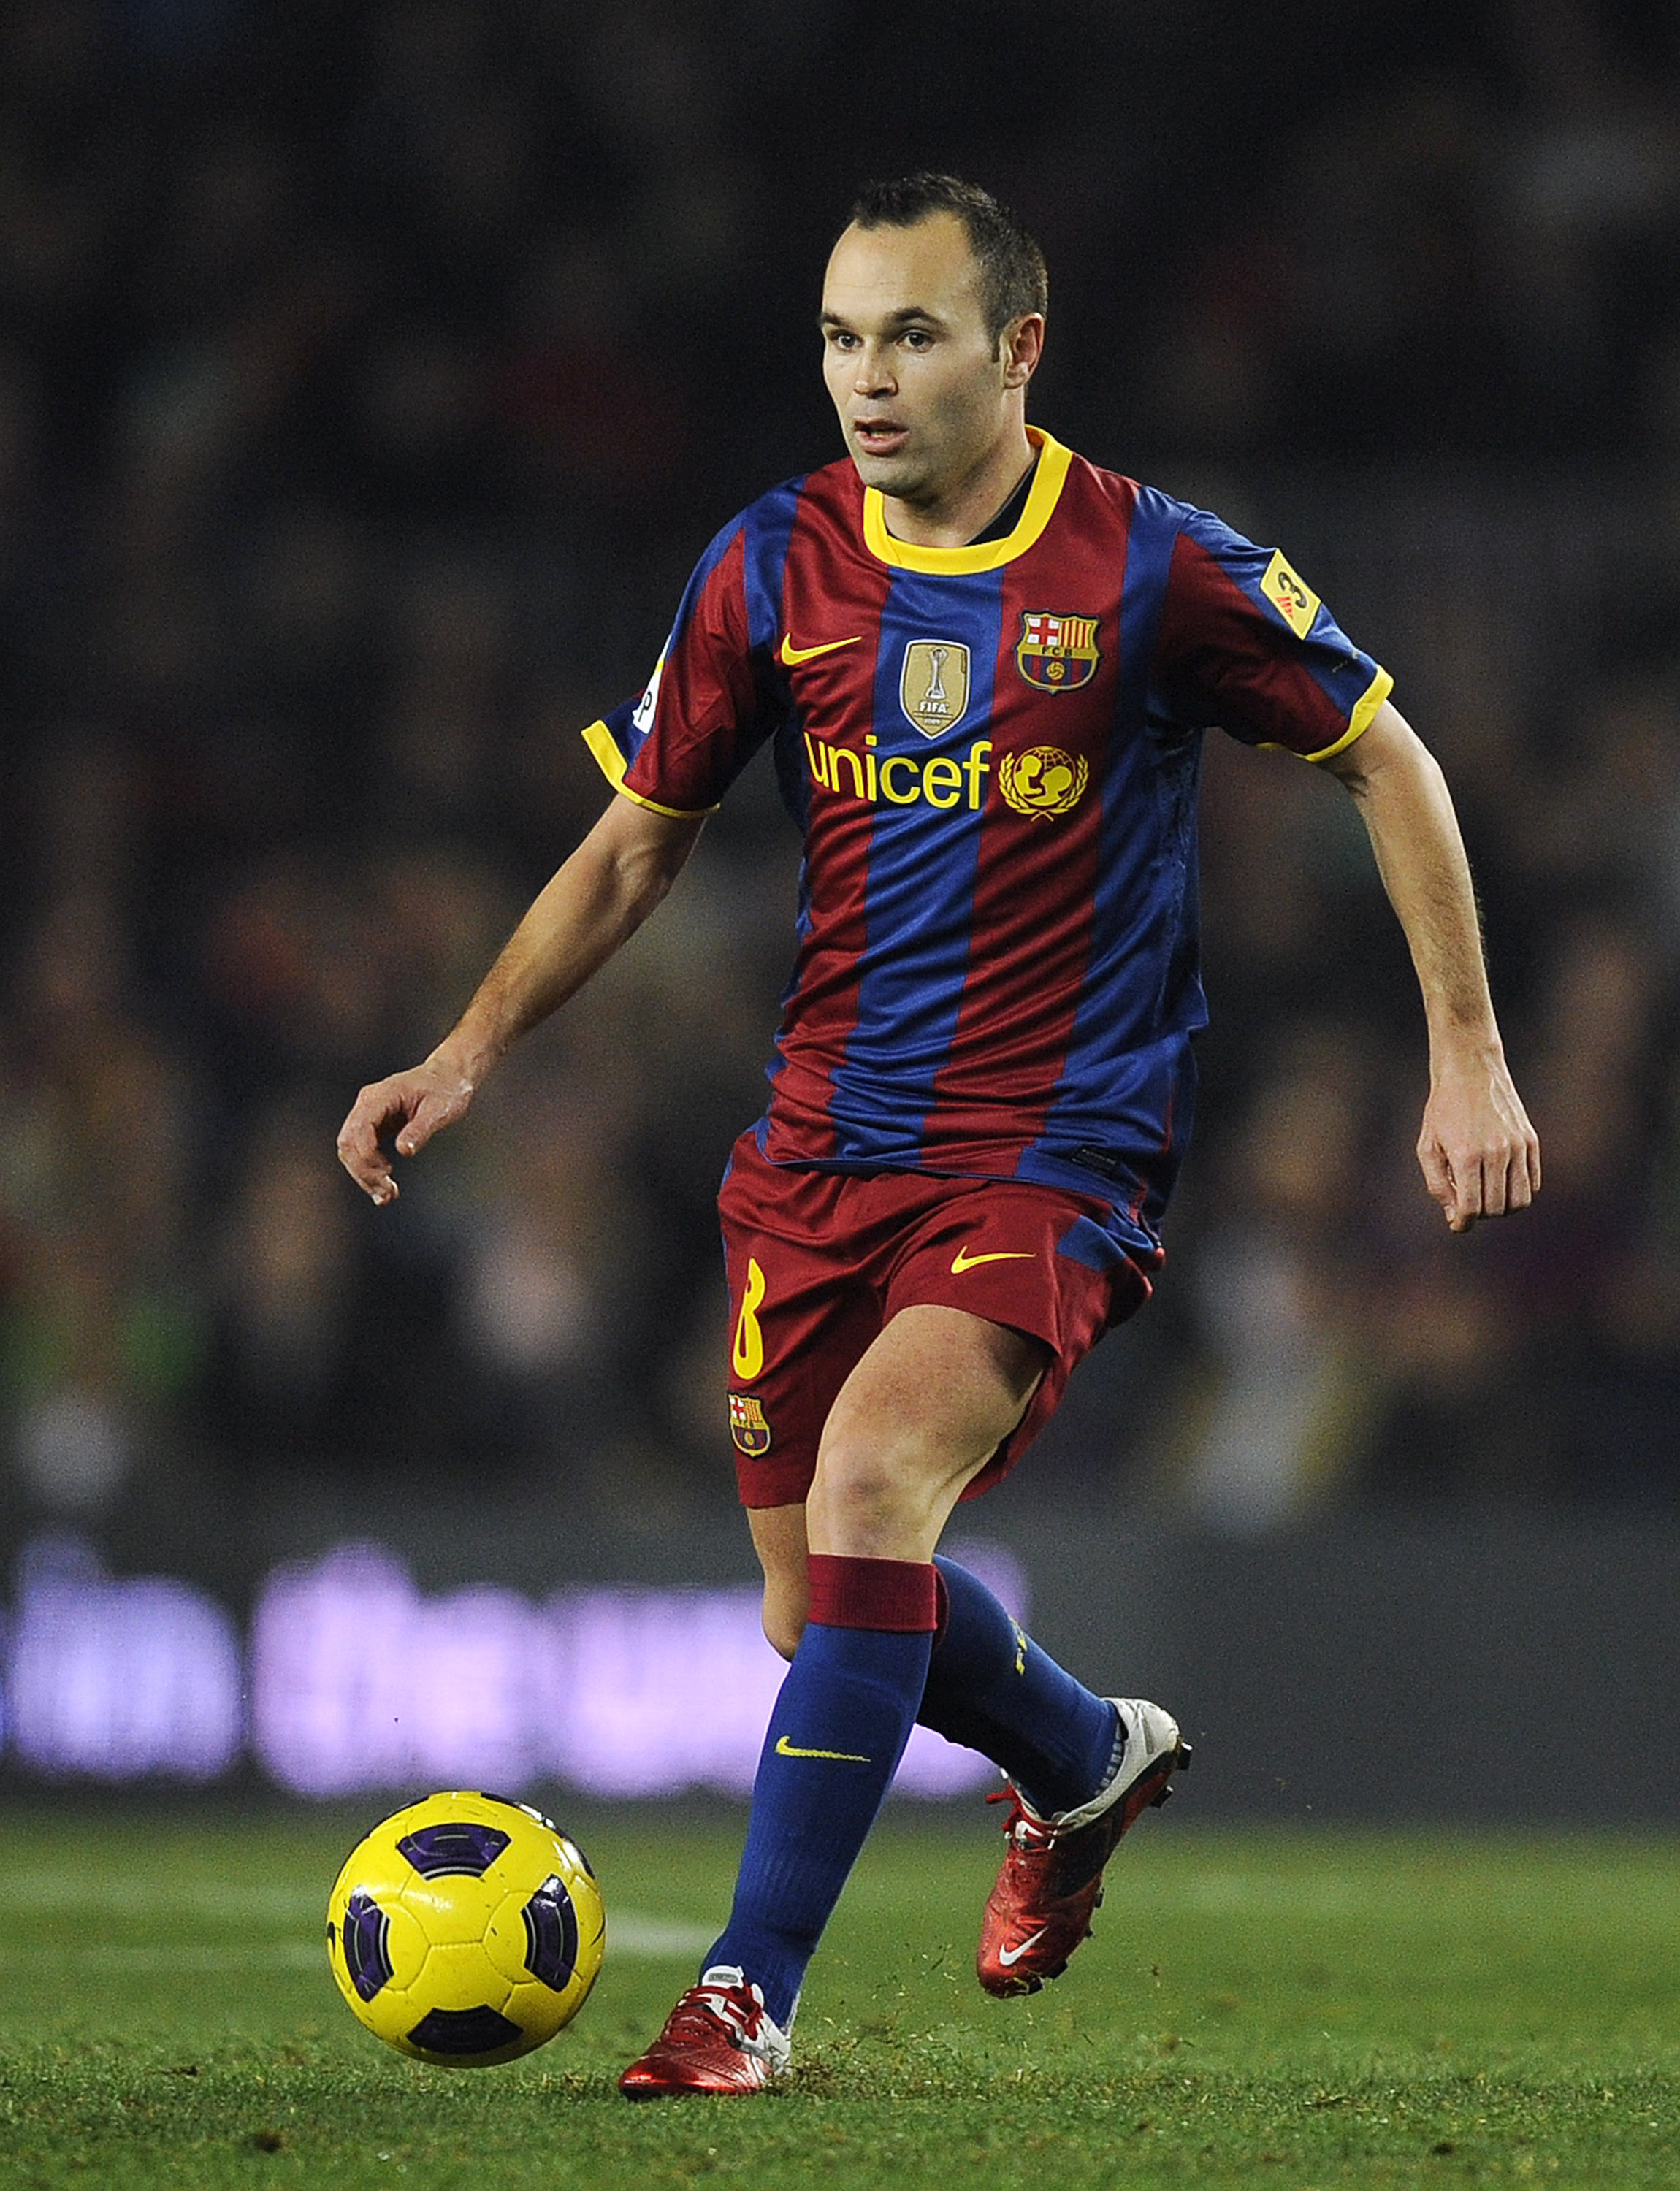 BARCELONA, SPAIN - DECEMBER 12:  Andres Iniesta of Barcelona runs with the ball during the La Liga match between Barcelona and Real Sociedad at Camp Nou Stadium on December 12, 2010 in Barcelona, Spain. Barcelona won 5-0.  (Photo by David Ramos/Getty Imag